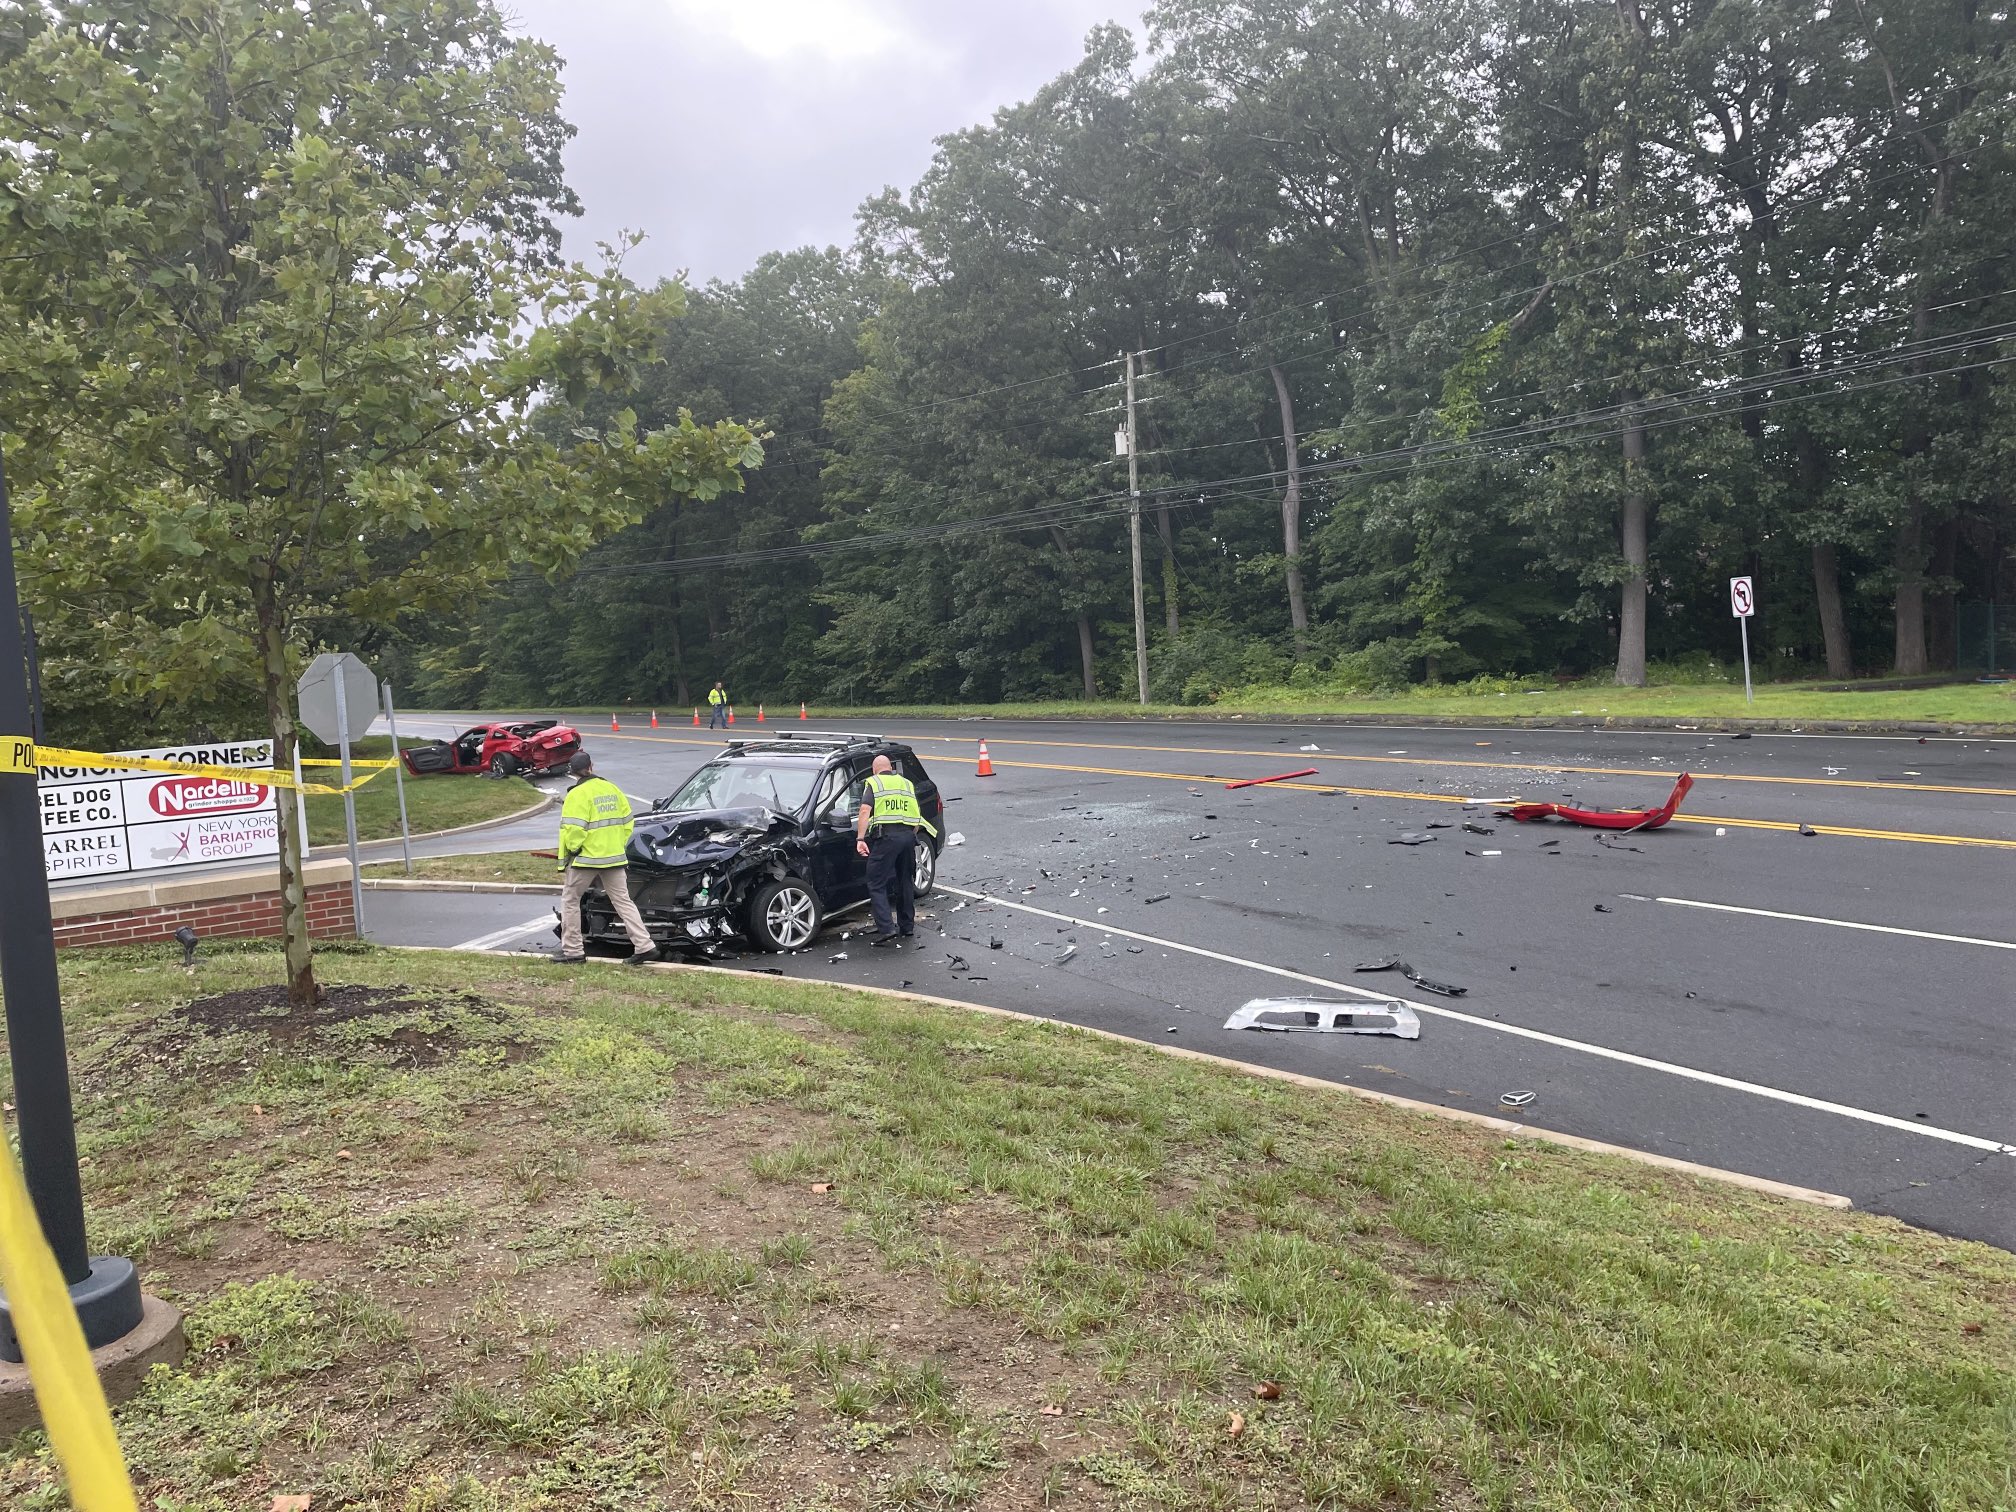 2‐CAR CRASH KILLS 6 IN CONNECTICUT; Auto Swerves Over Mall on